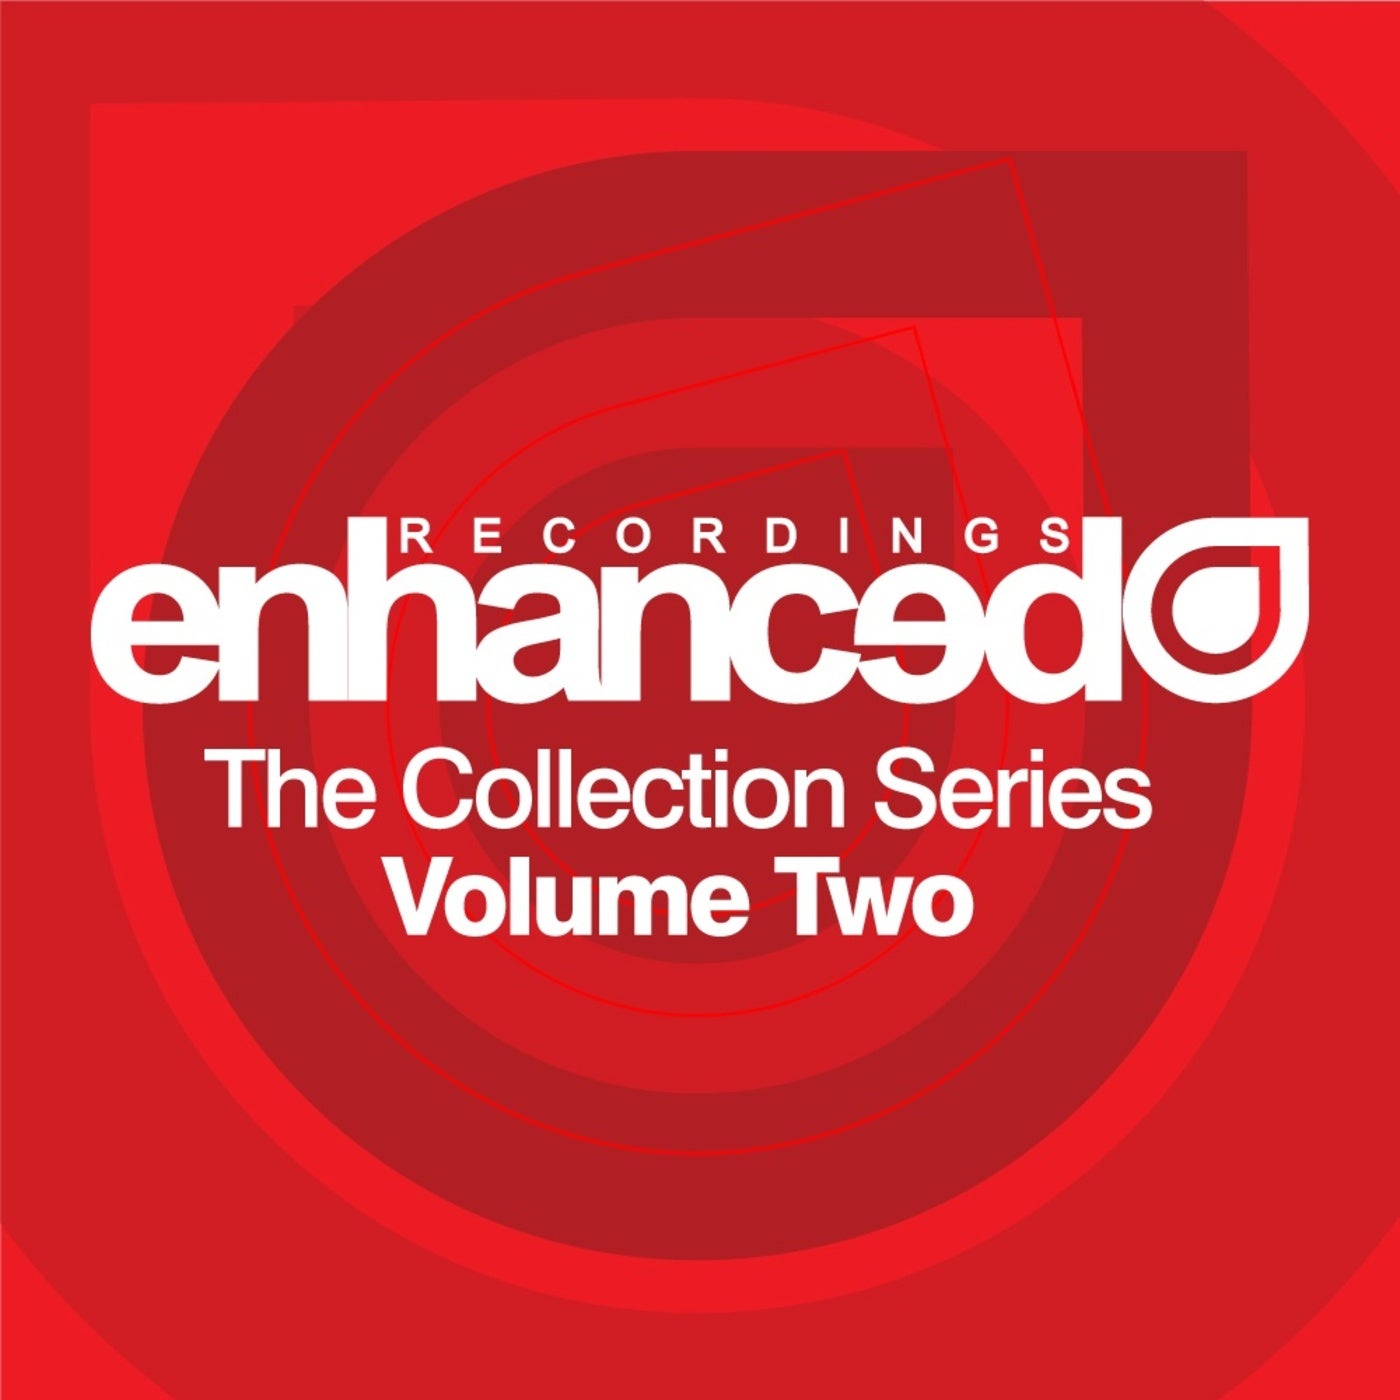 Collection Series Volume 2